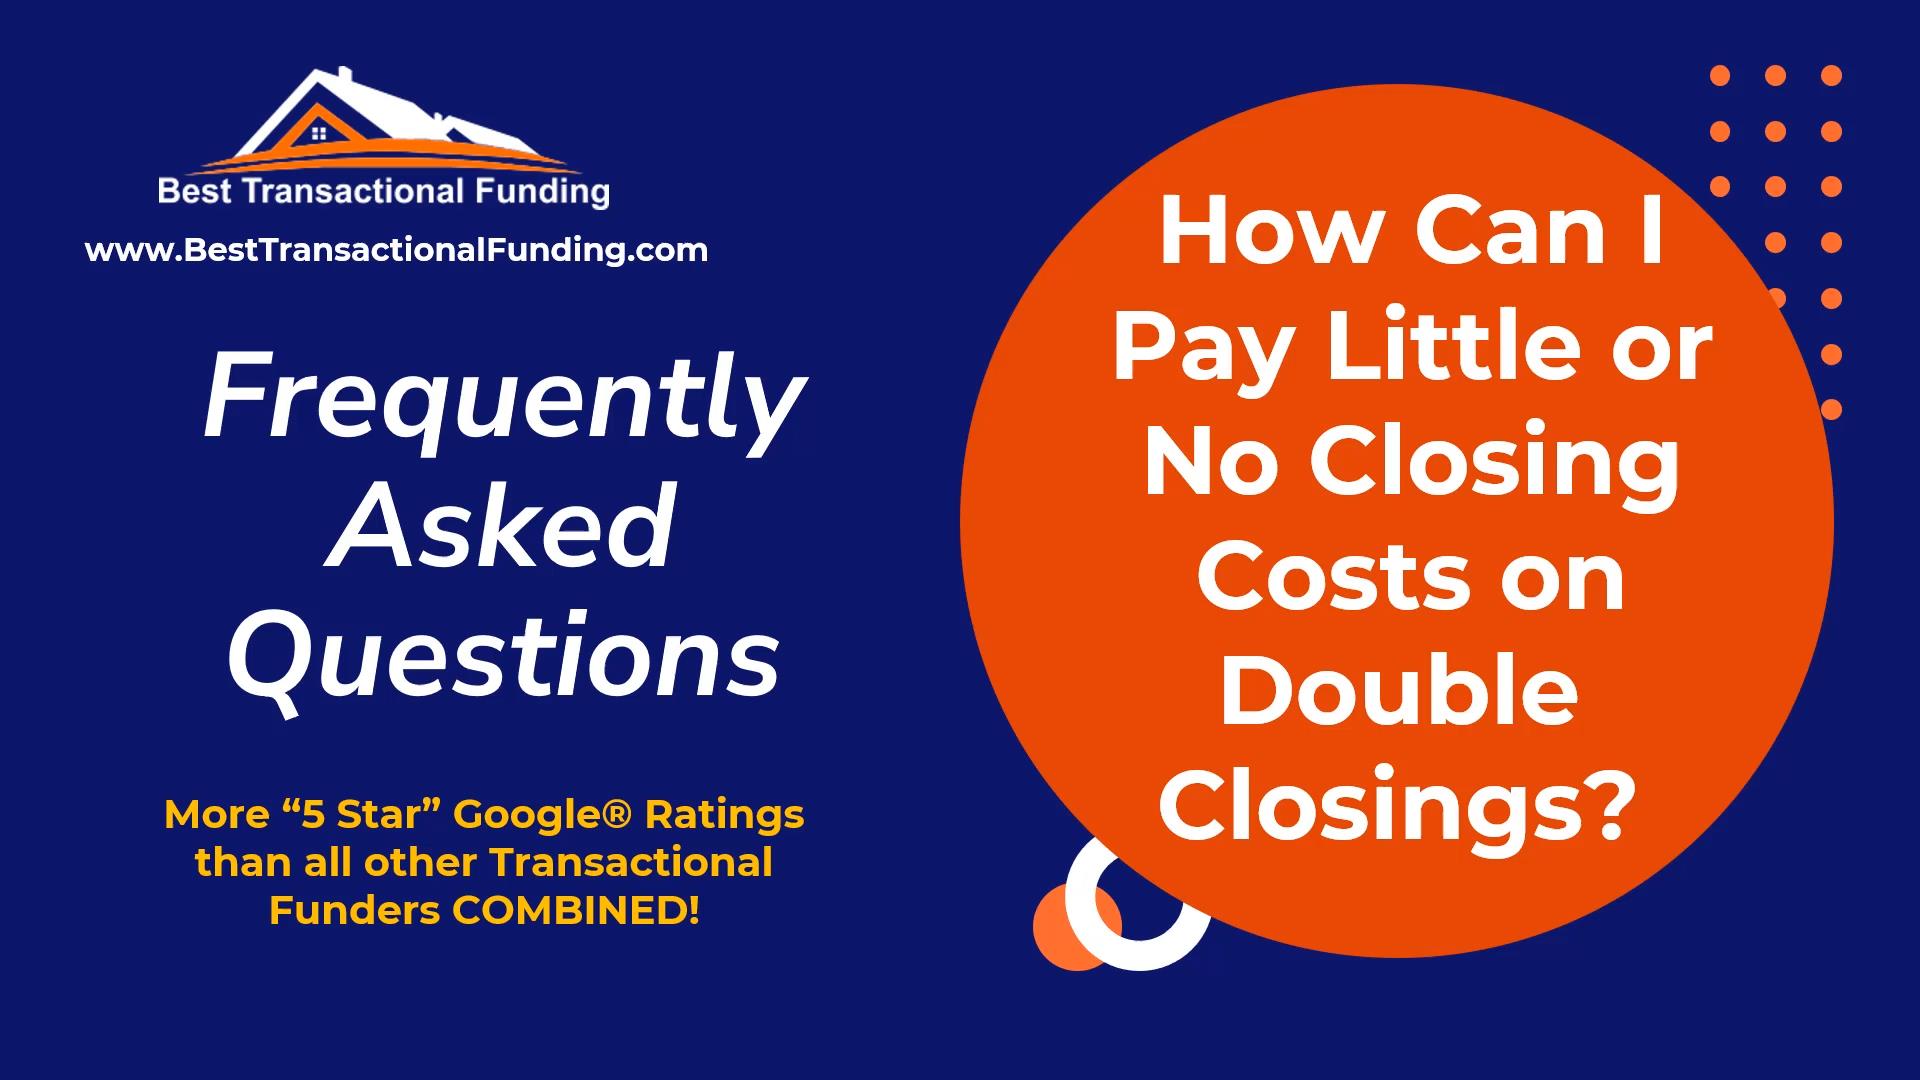 Saving On Double Closing Costs